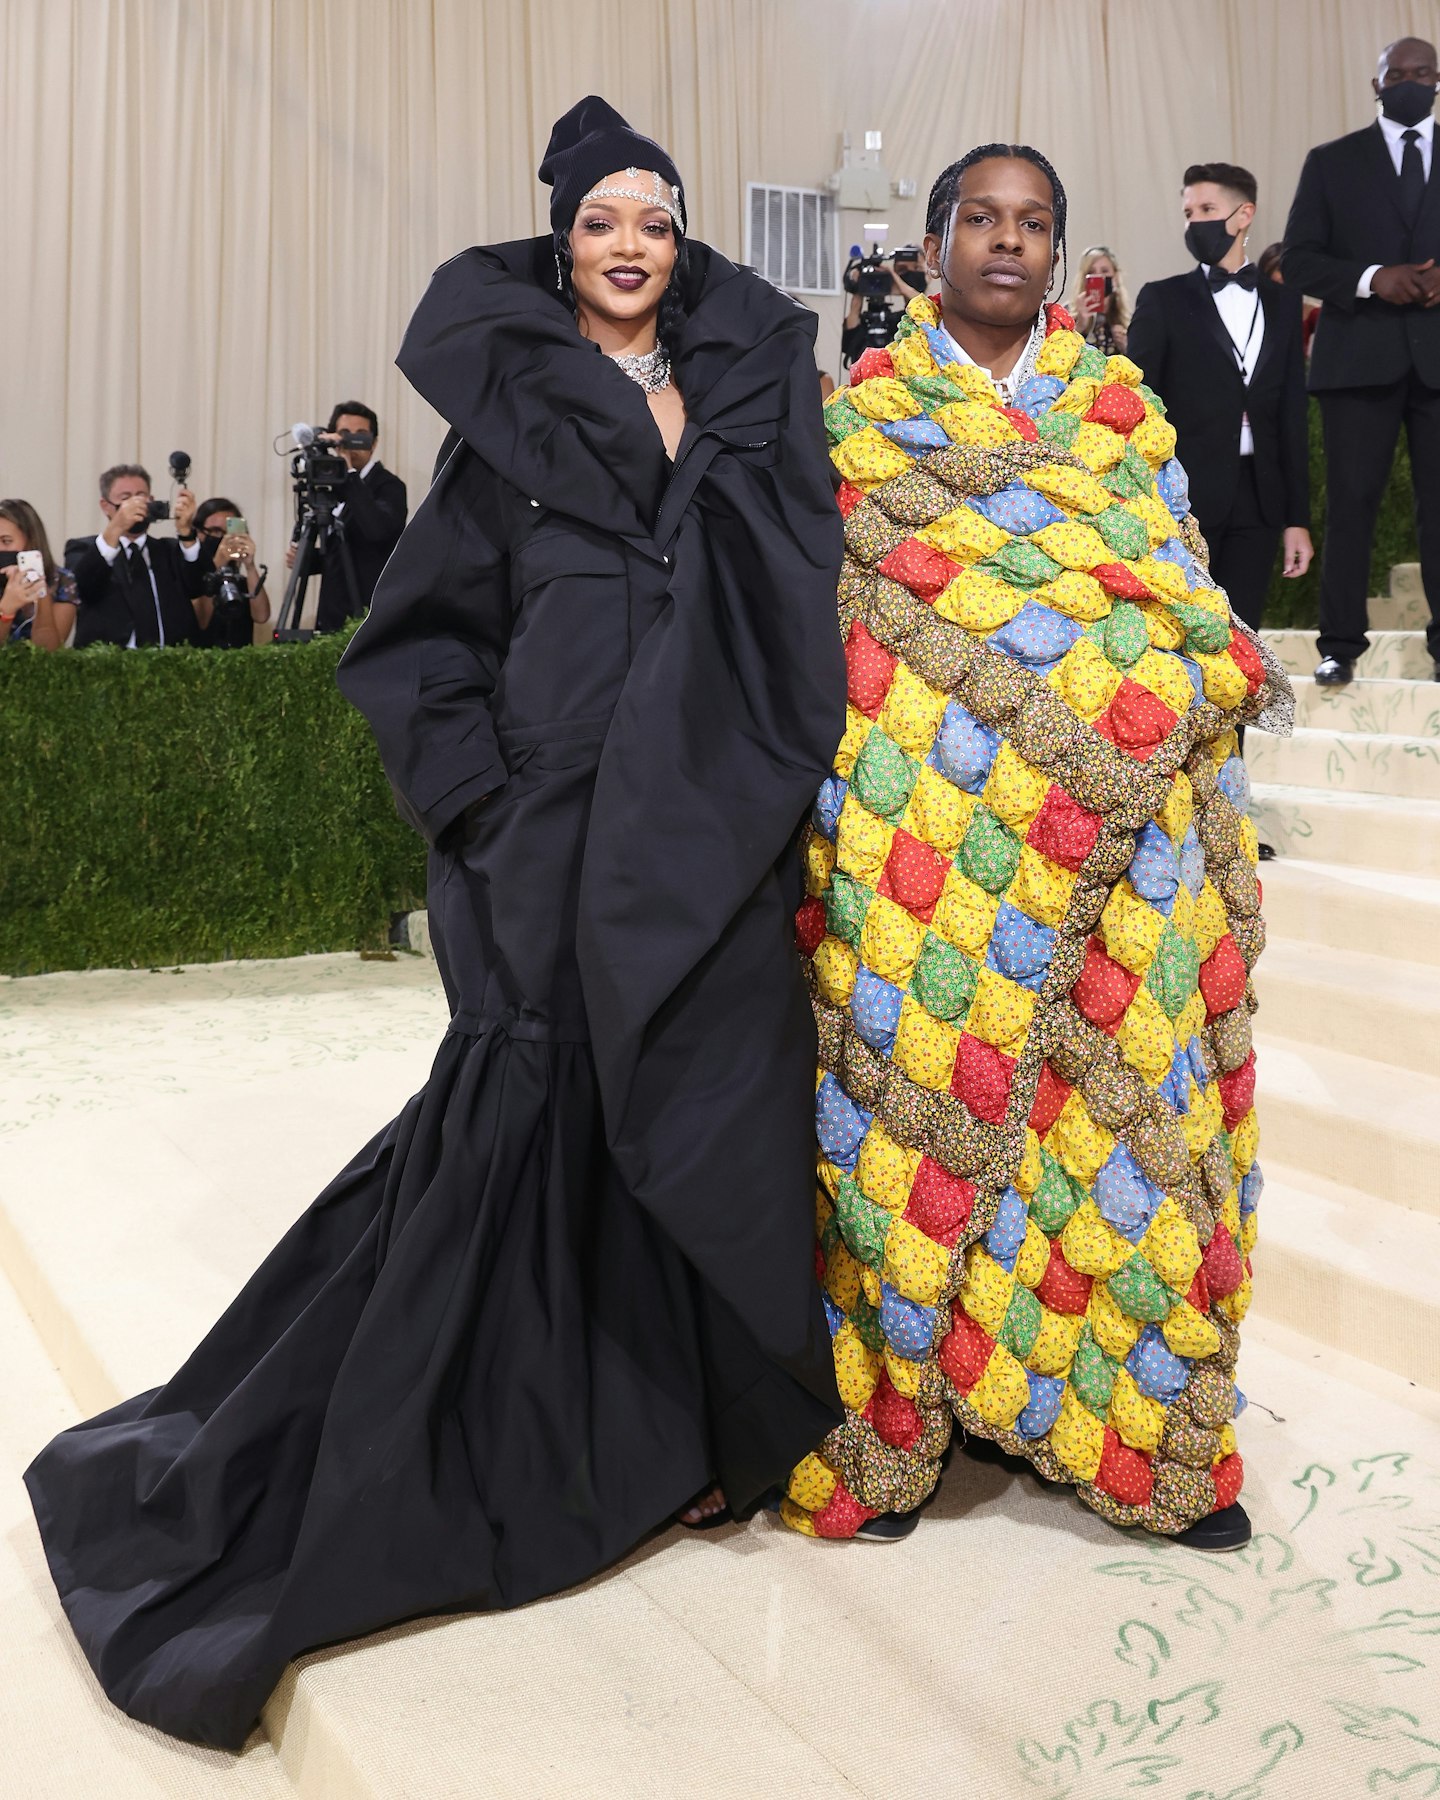 rihanna with asap rocky at the met gala 2021